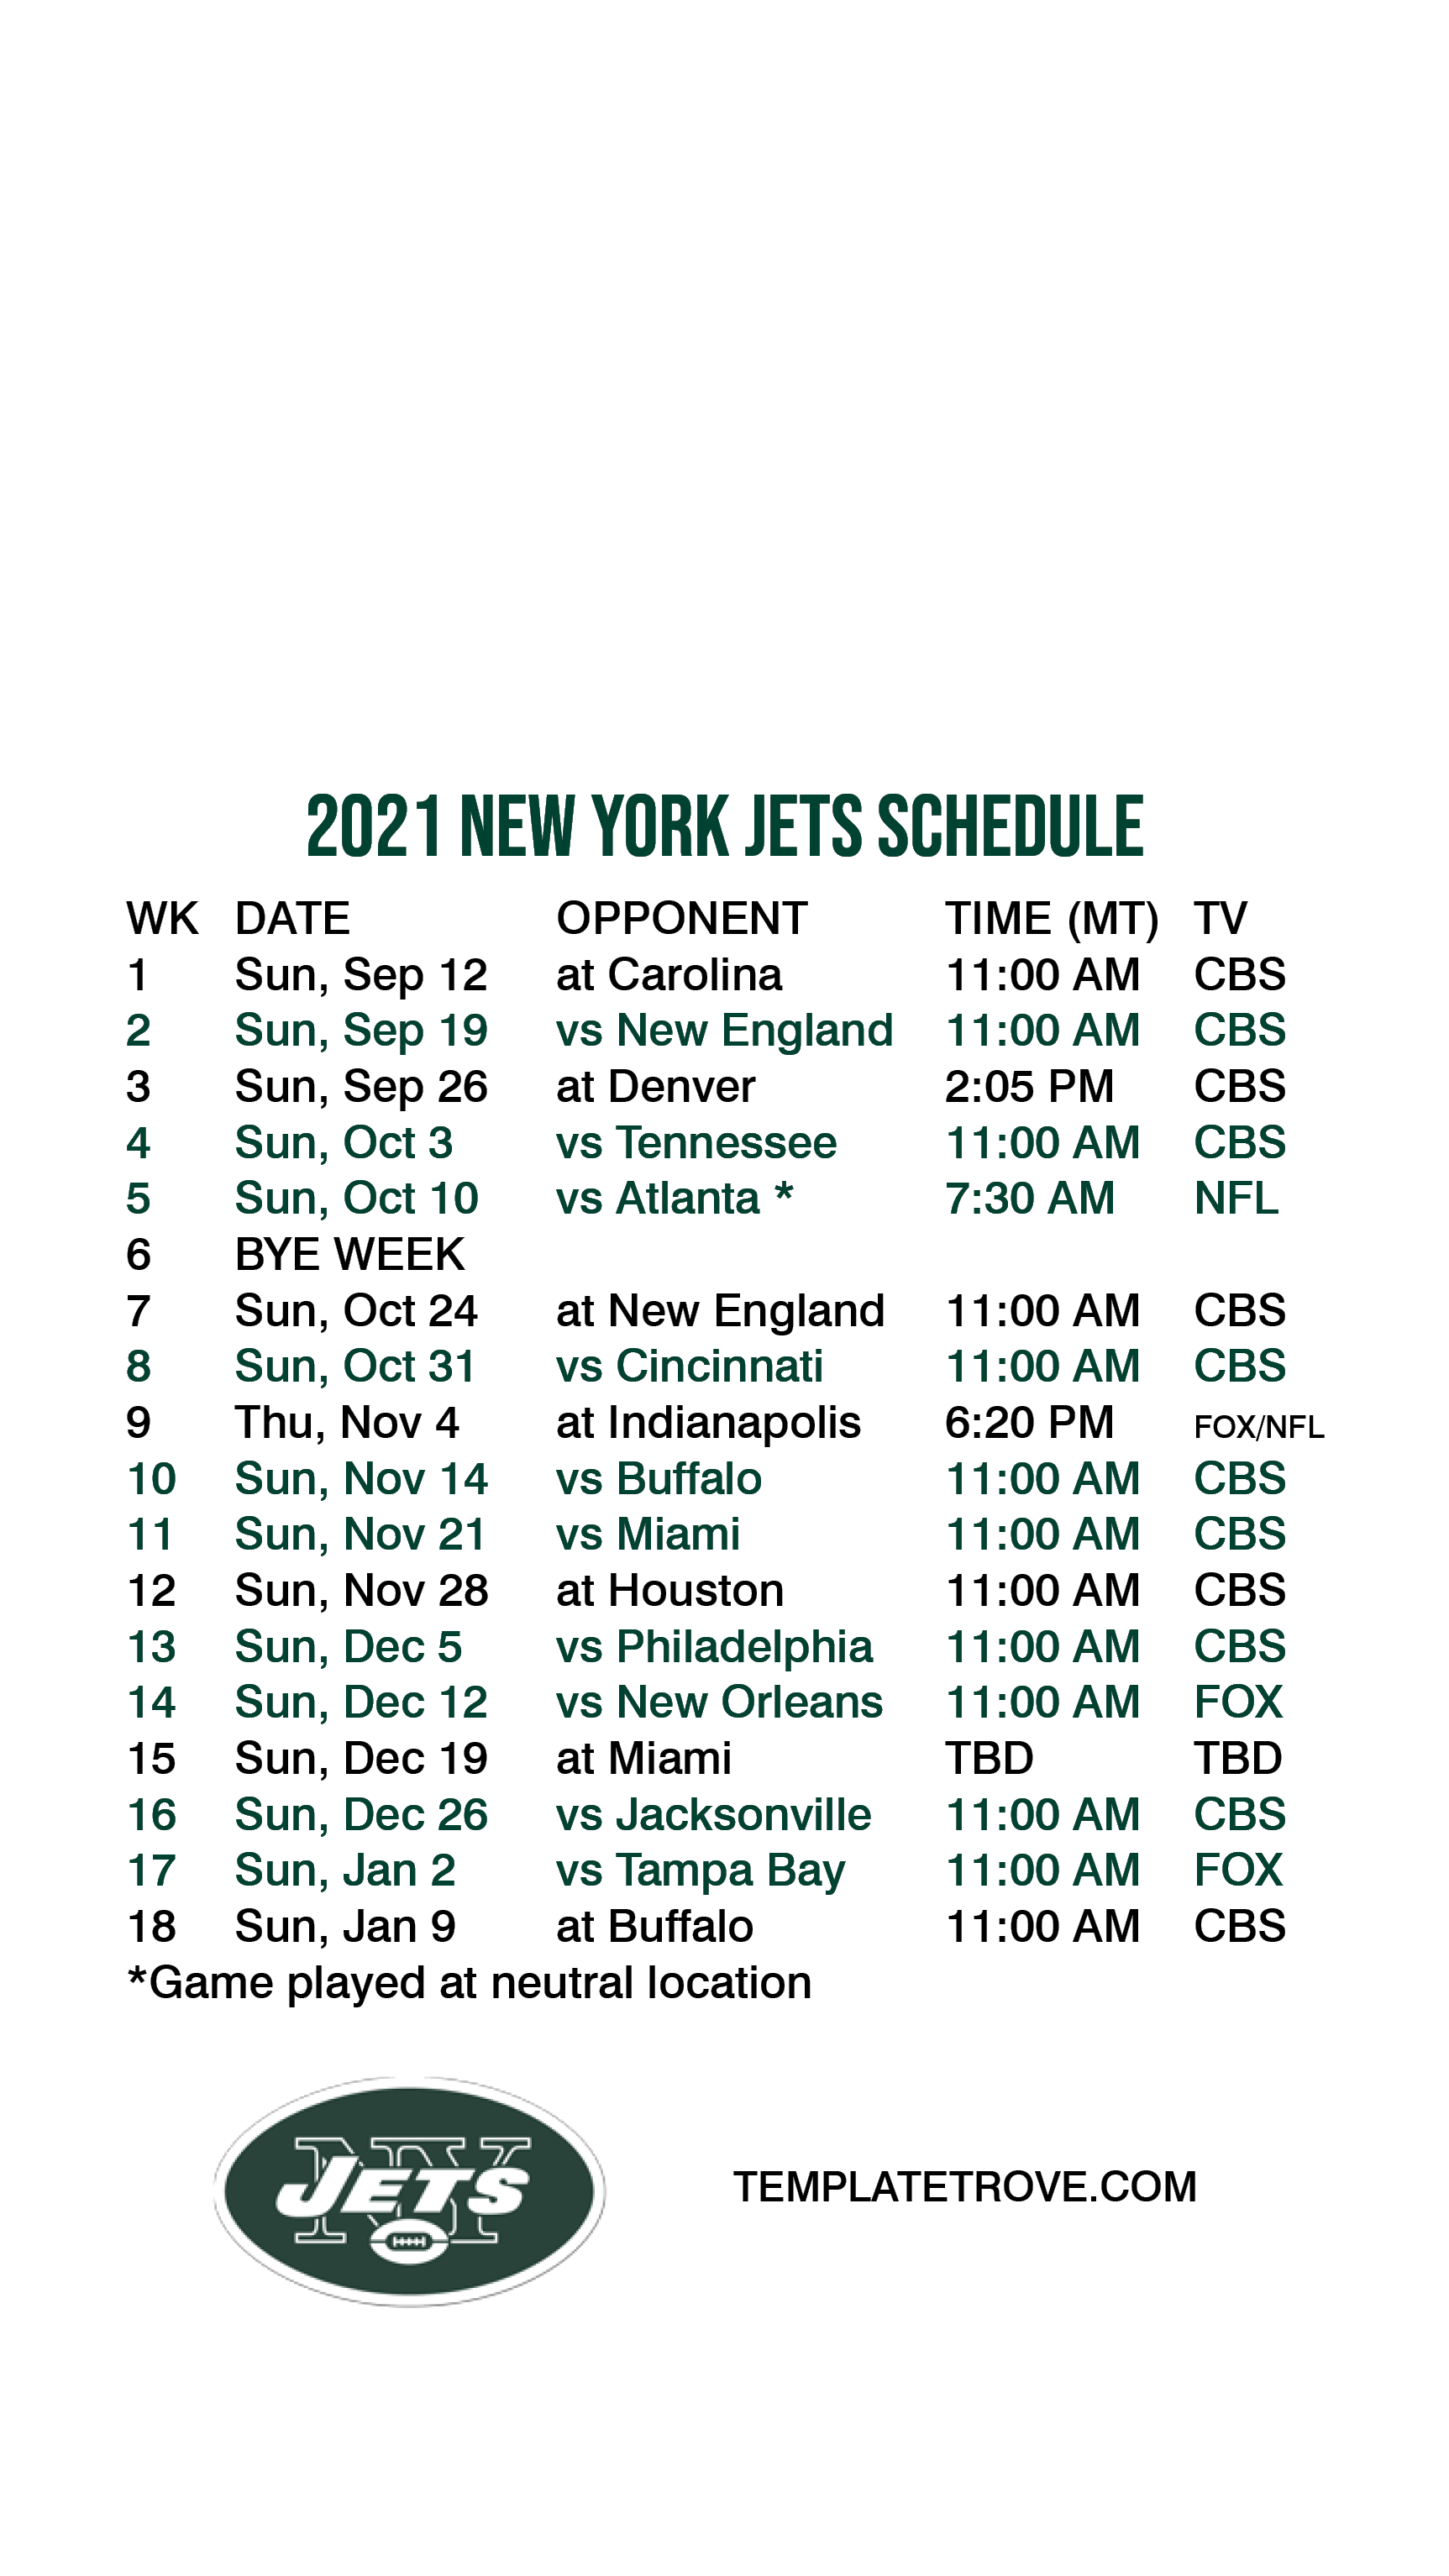 Jets Schedule 2022 2021-2022 New York Jets Lock Screen Schedule For Iphone 6-7-8 Plus